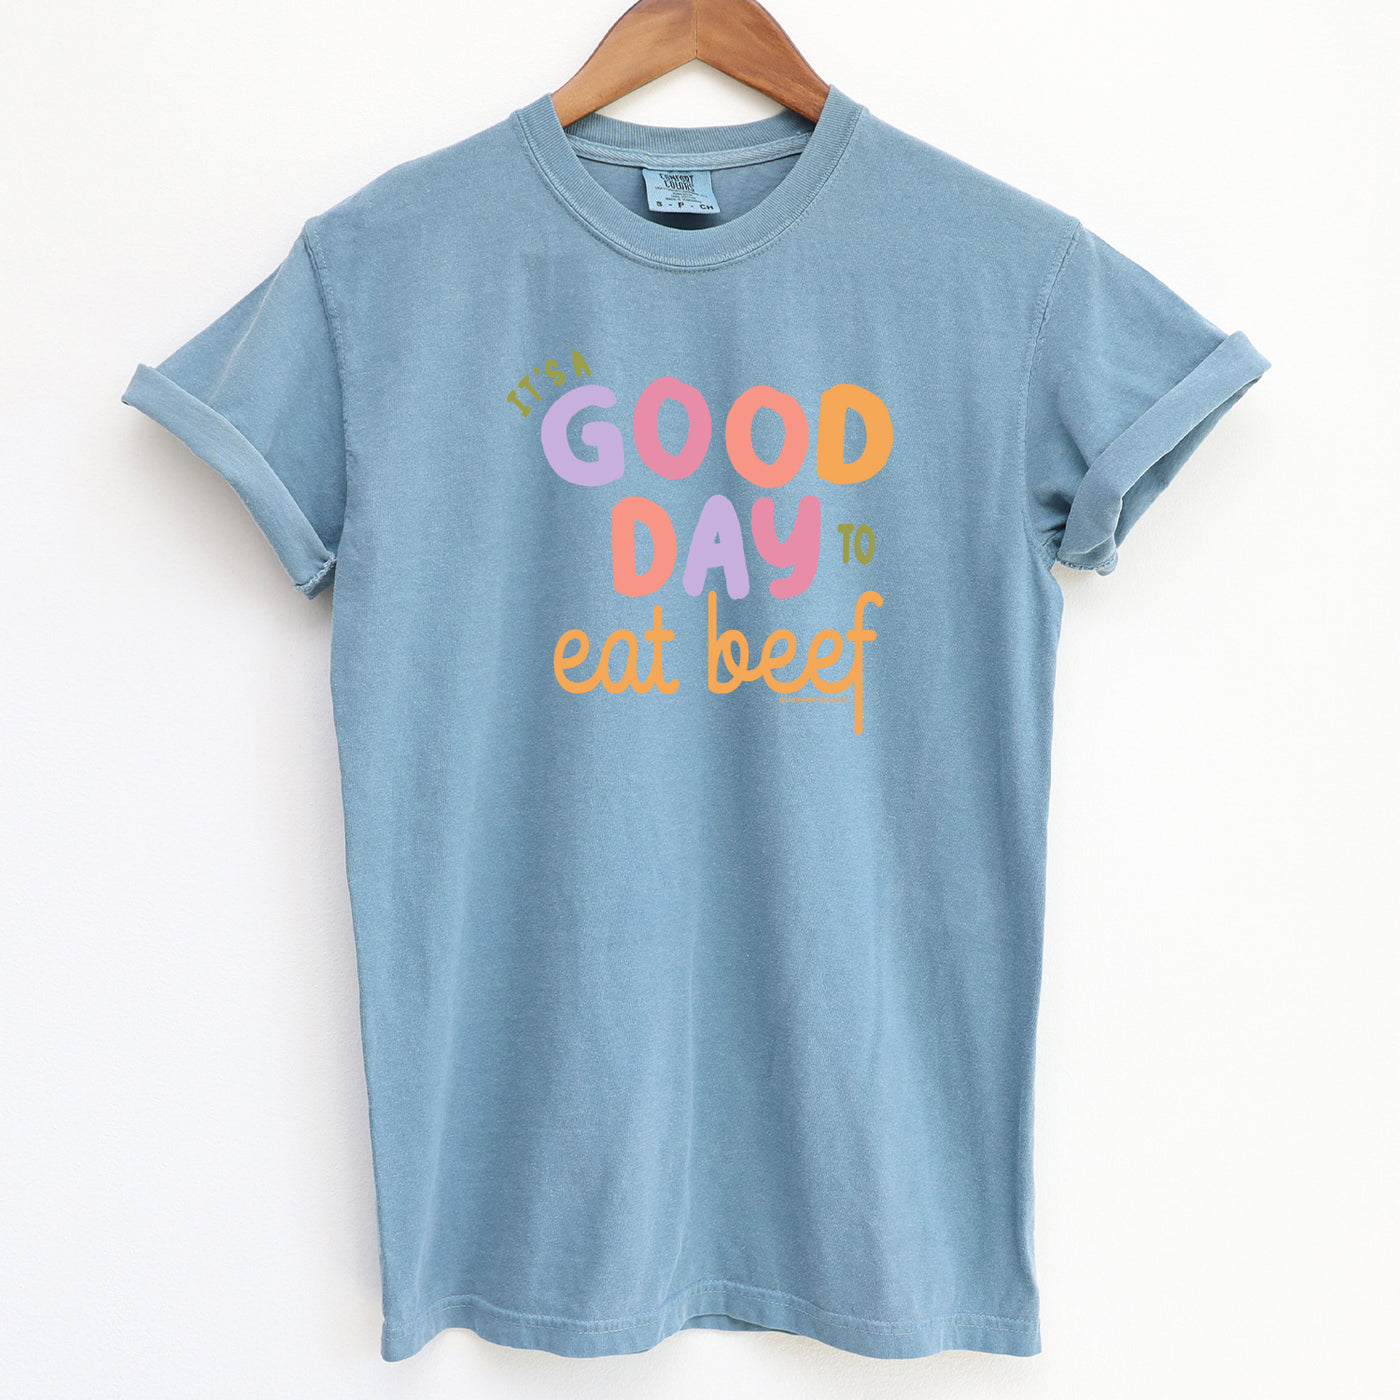 It's A Good Day To Eat Beef ComfortWash/ComfortColor T-Shirt (S-4XL) - Multiple Colors!